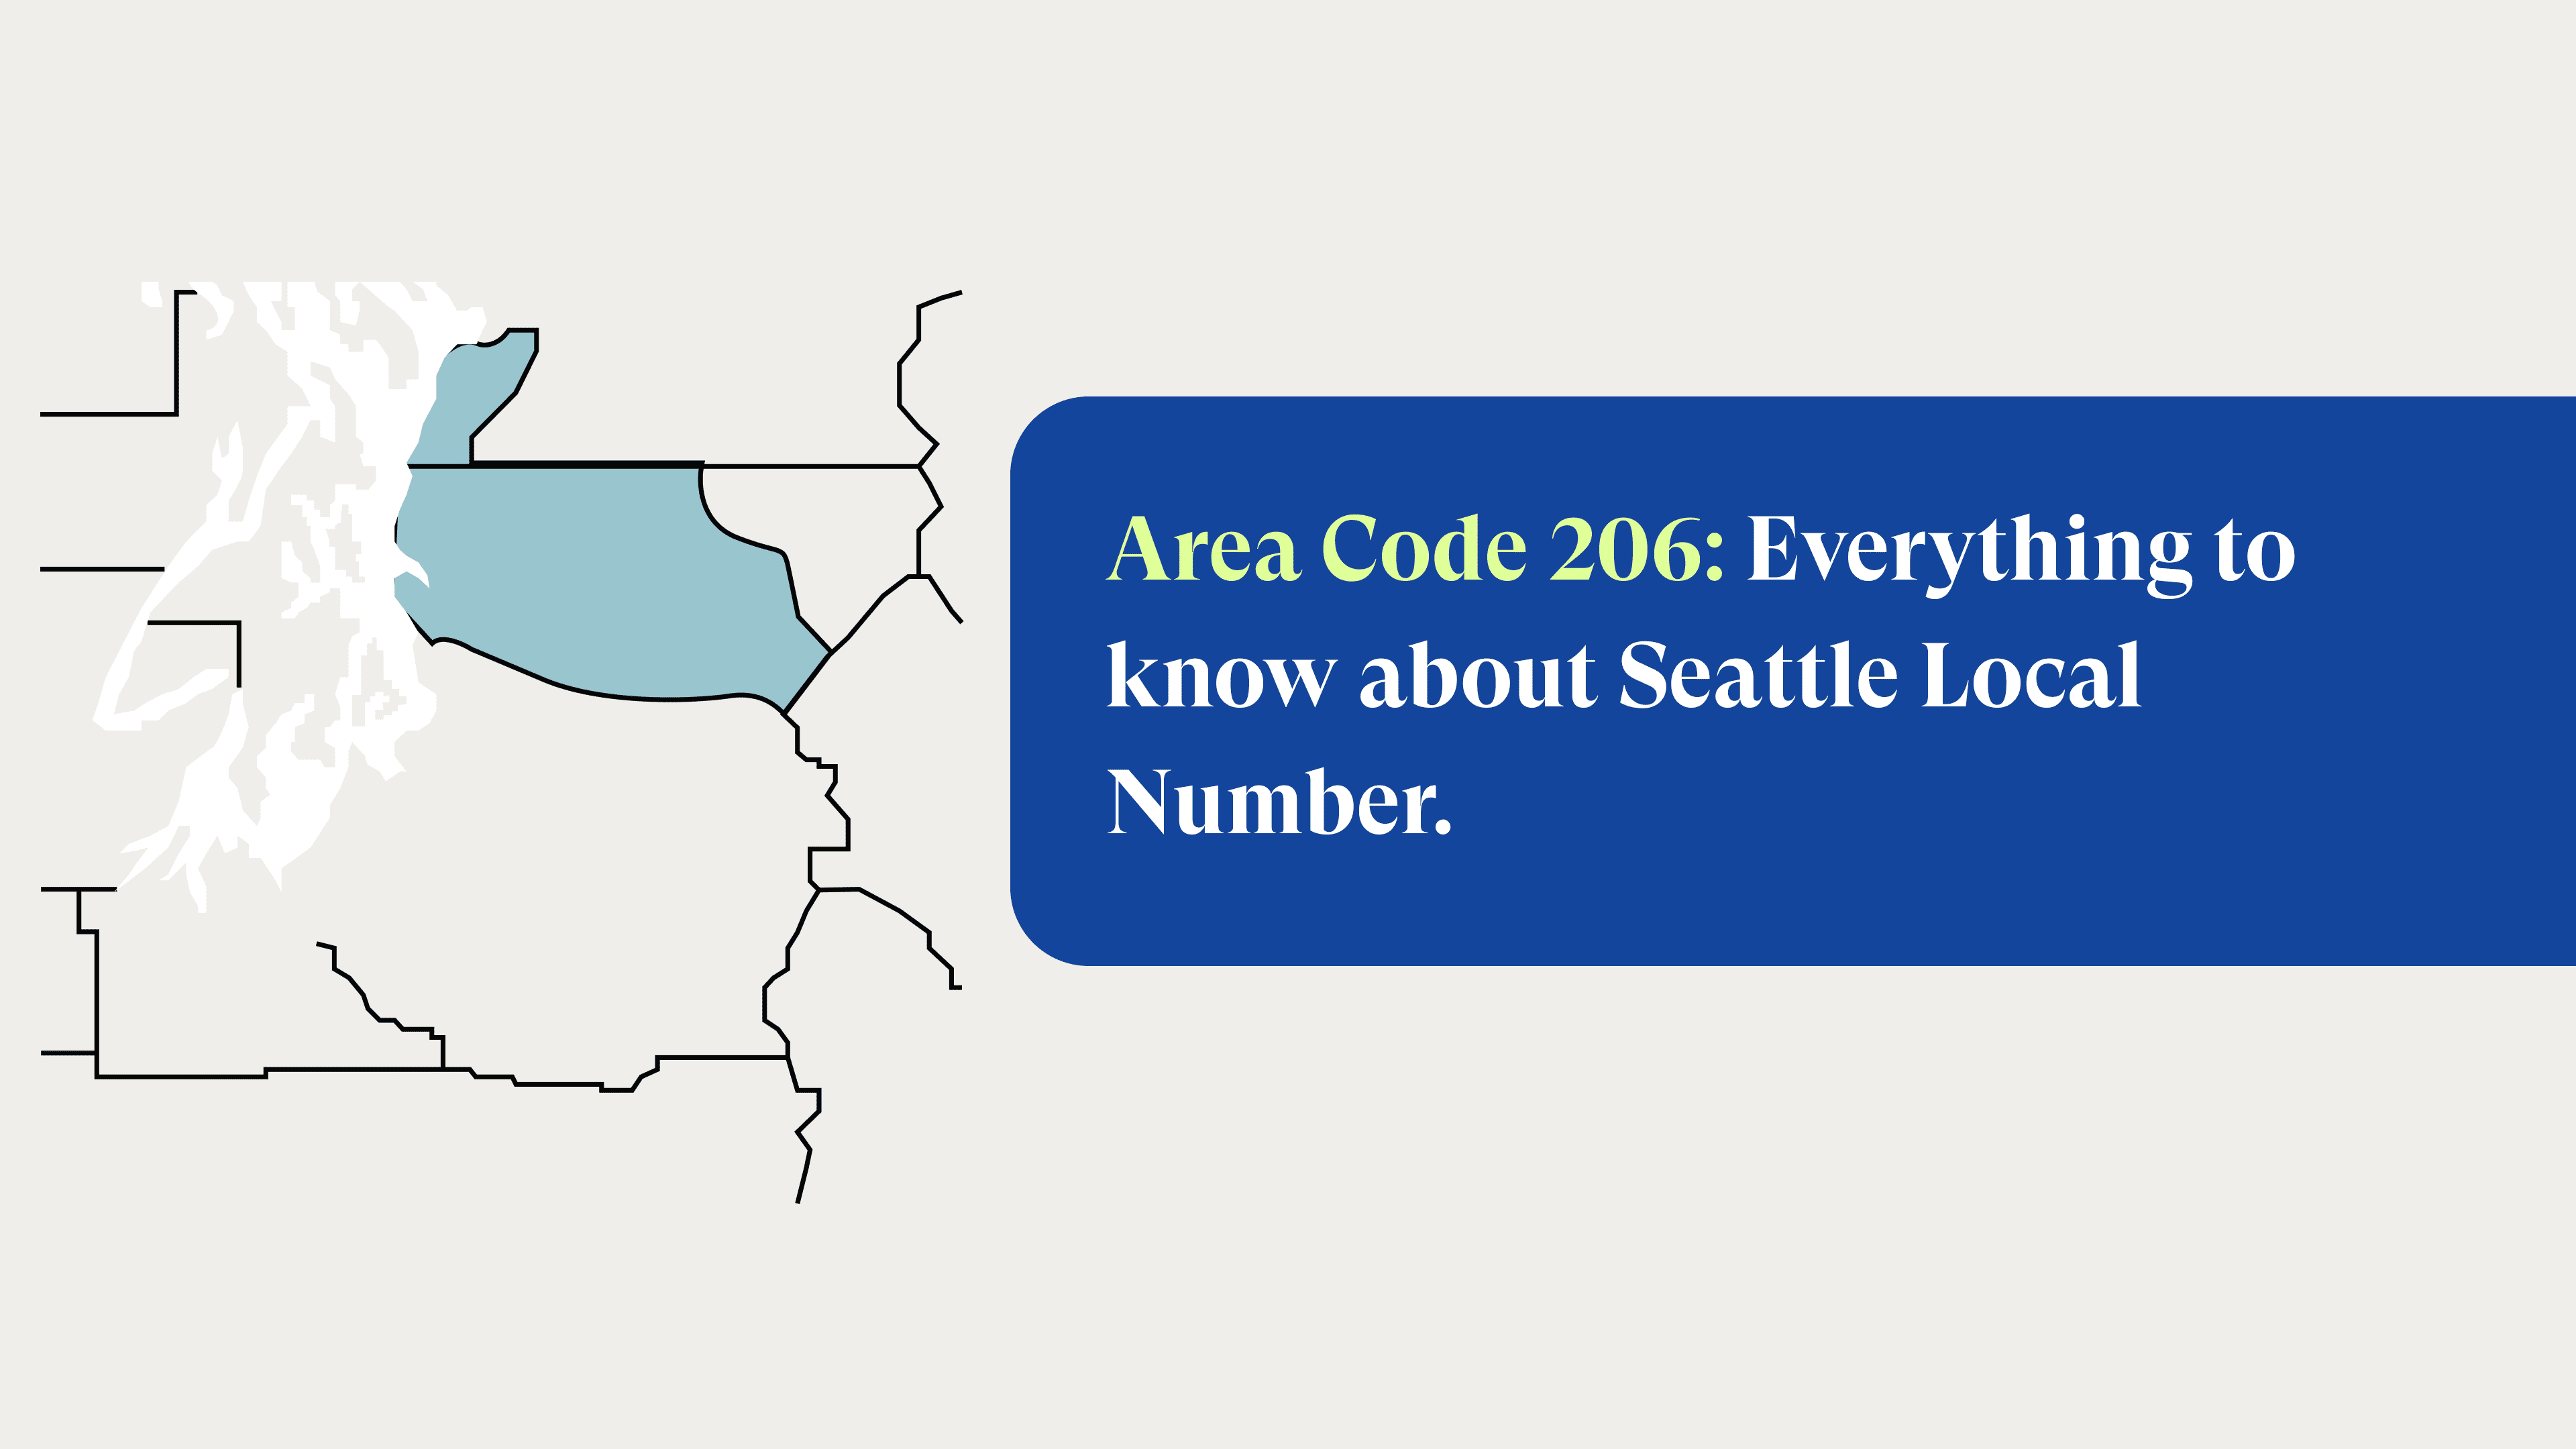 206 Area Code: Seattle Local Phone Numbers